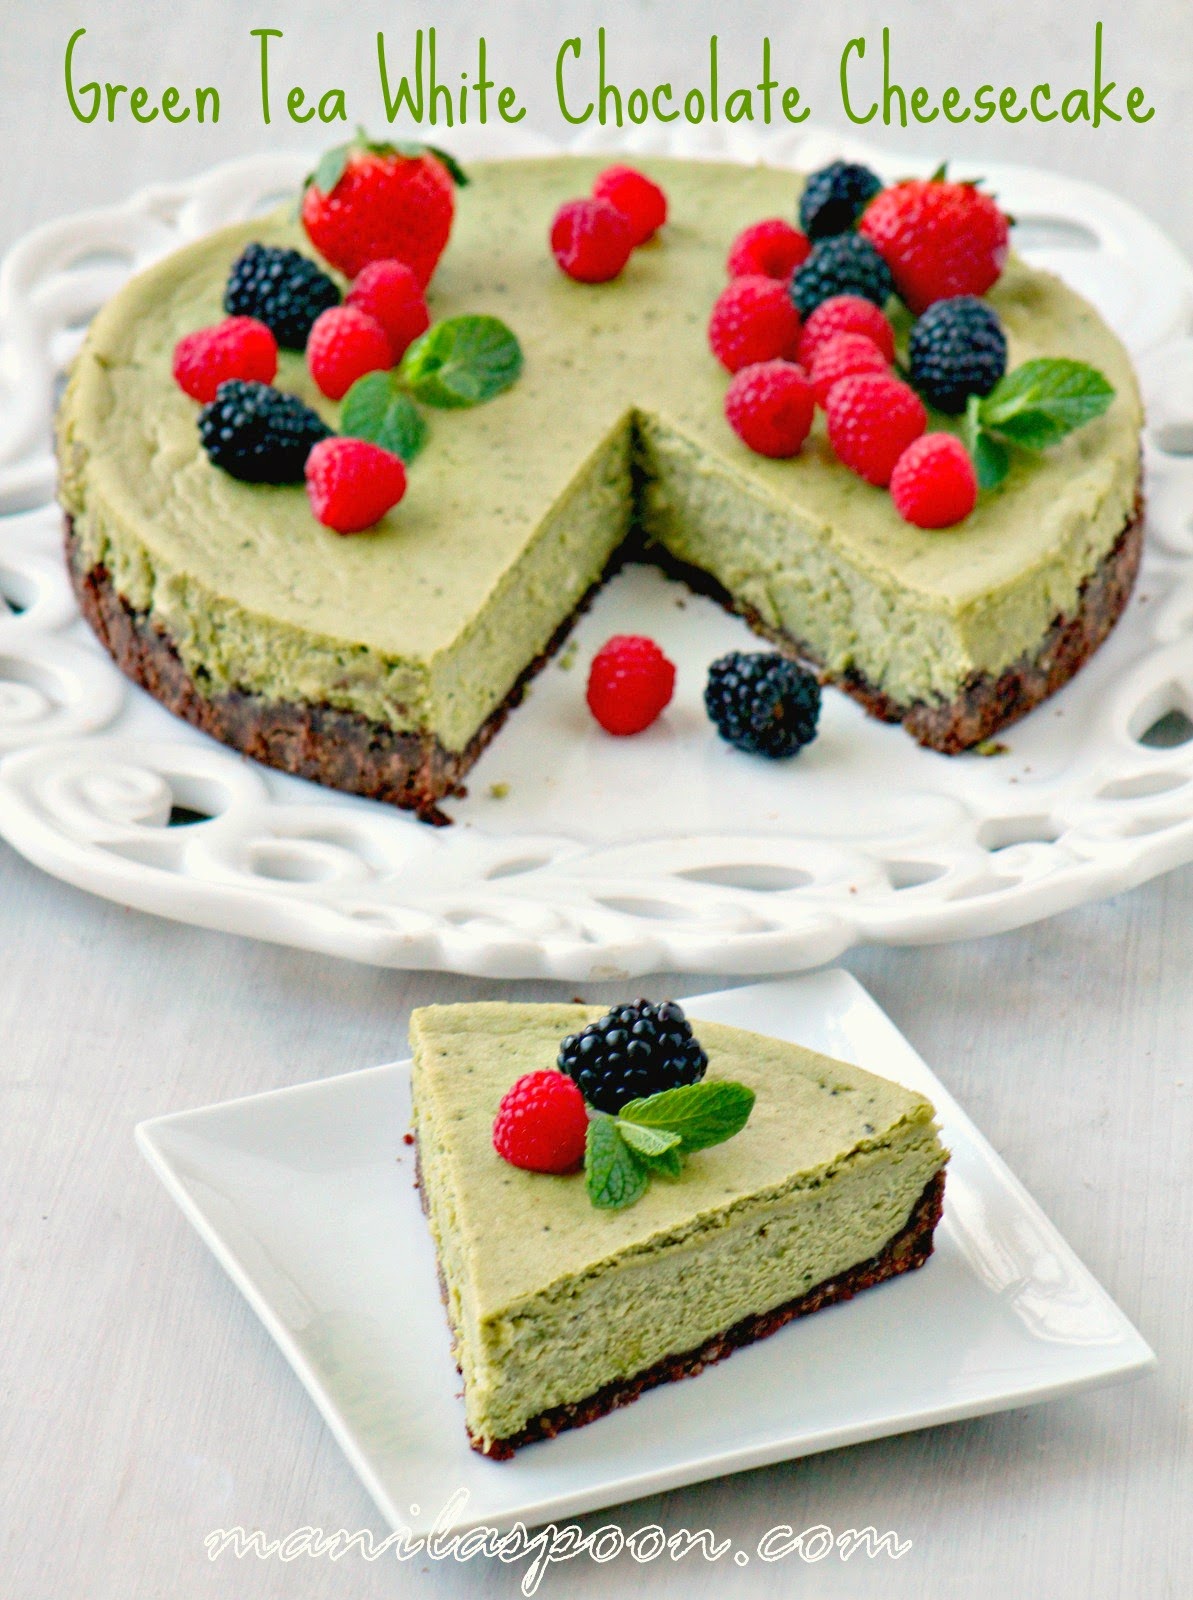 A rich and luxurious GREEN TEA WHITE CHOCOLATE CHEESECAKE with a subtle hint of green tea and the yummy flavor of white chocolate! This gorgeous cake is perfect for Christmas, New Year or any holiday! | manilaspoon.com